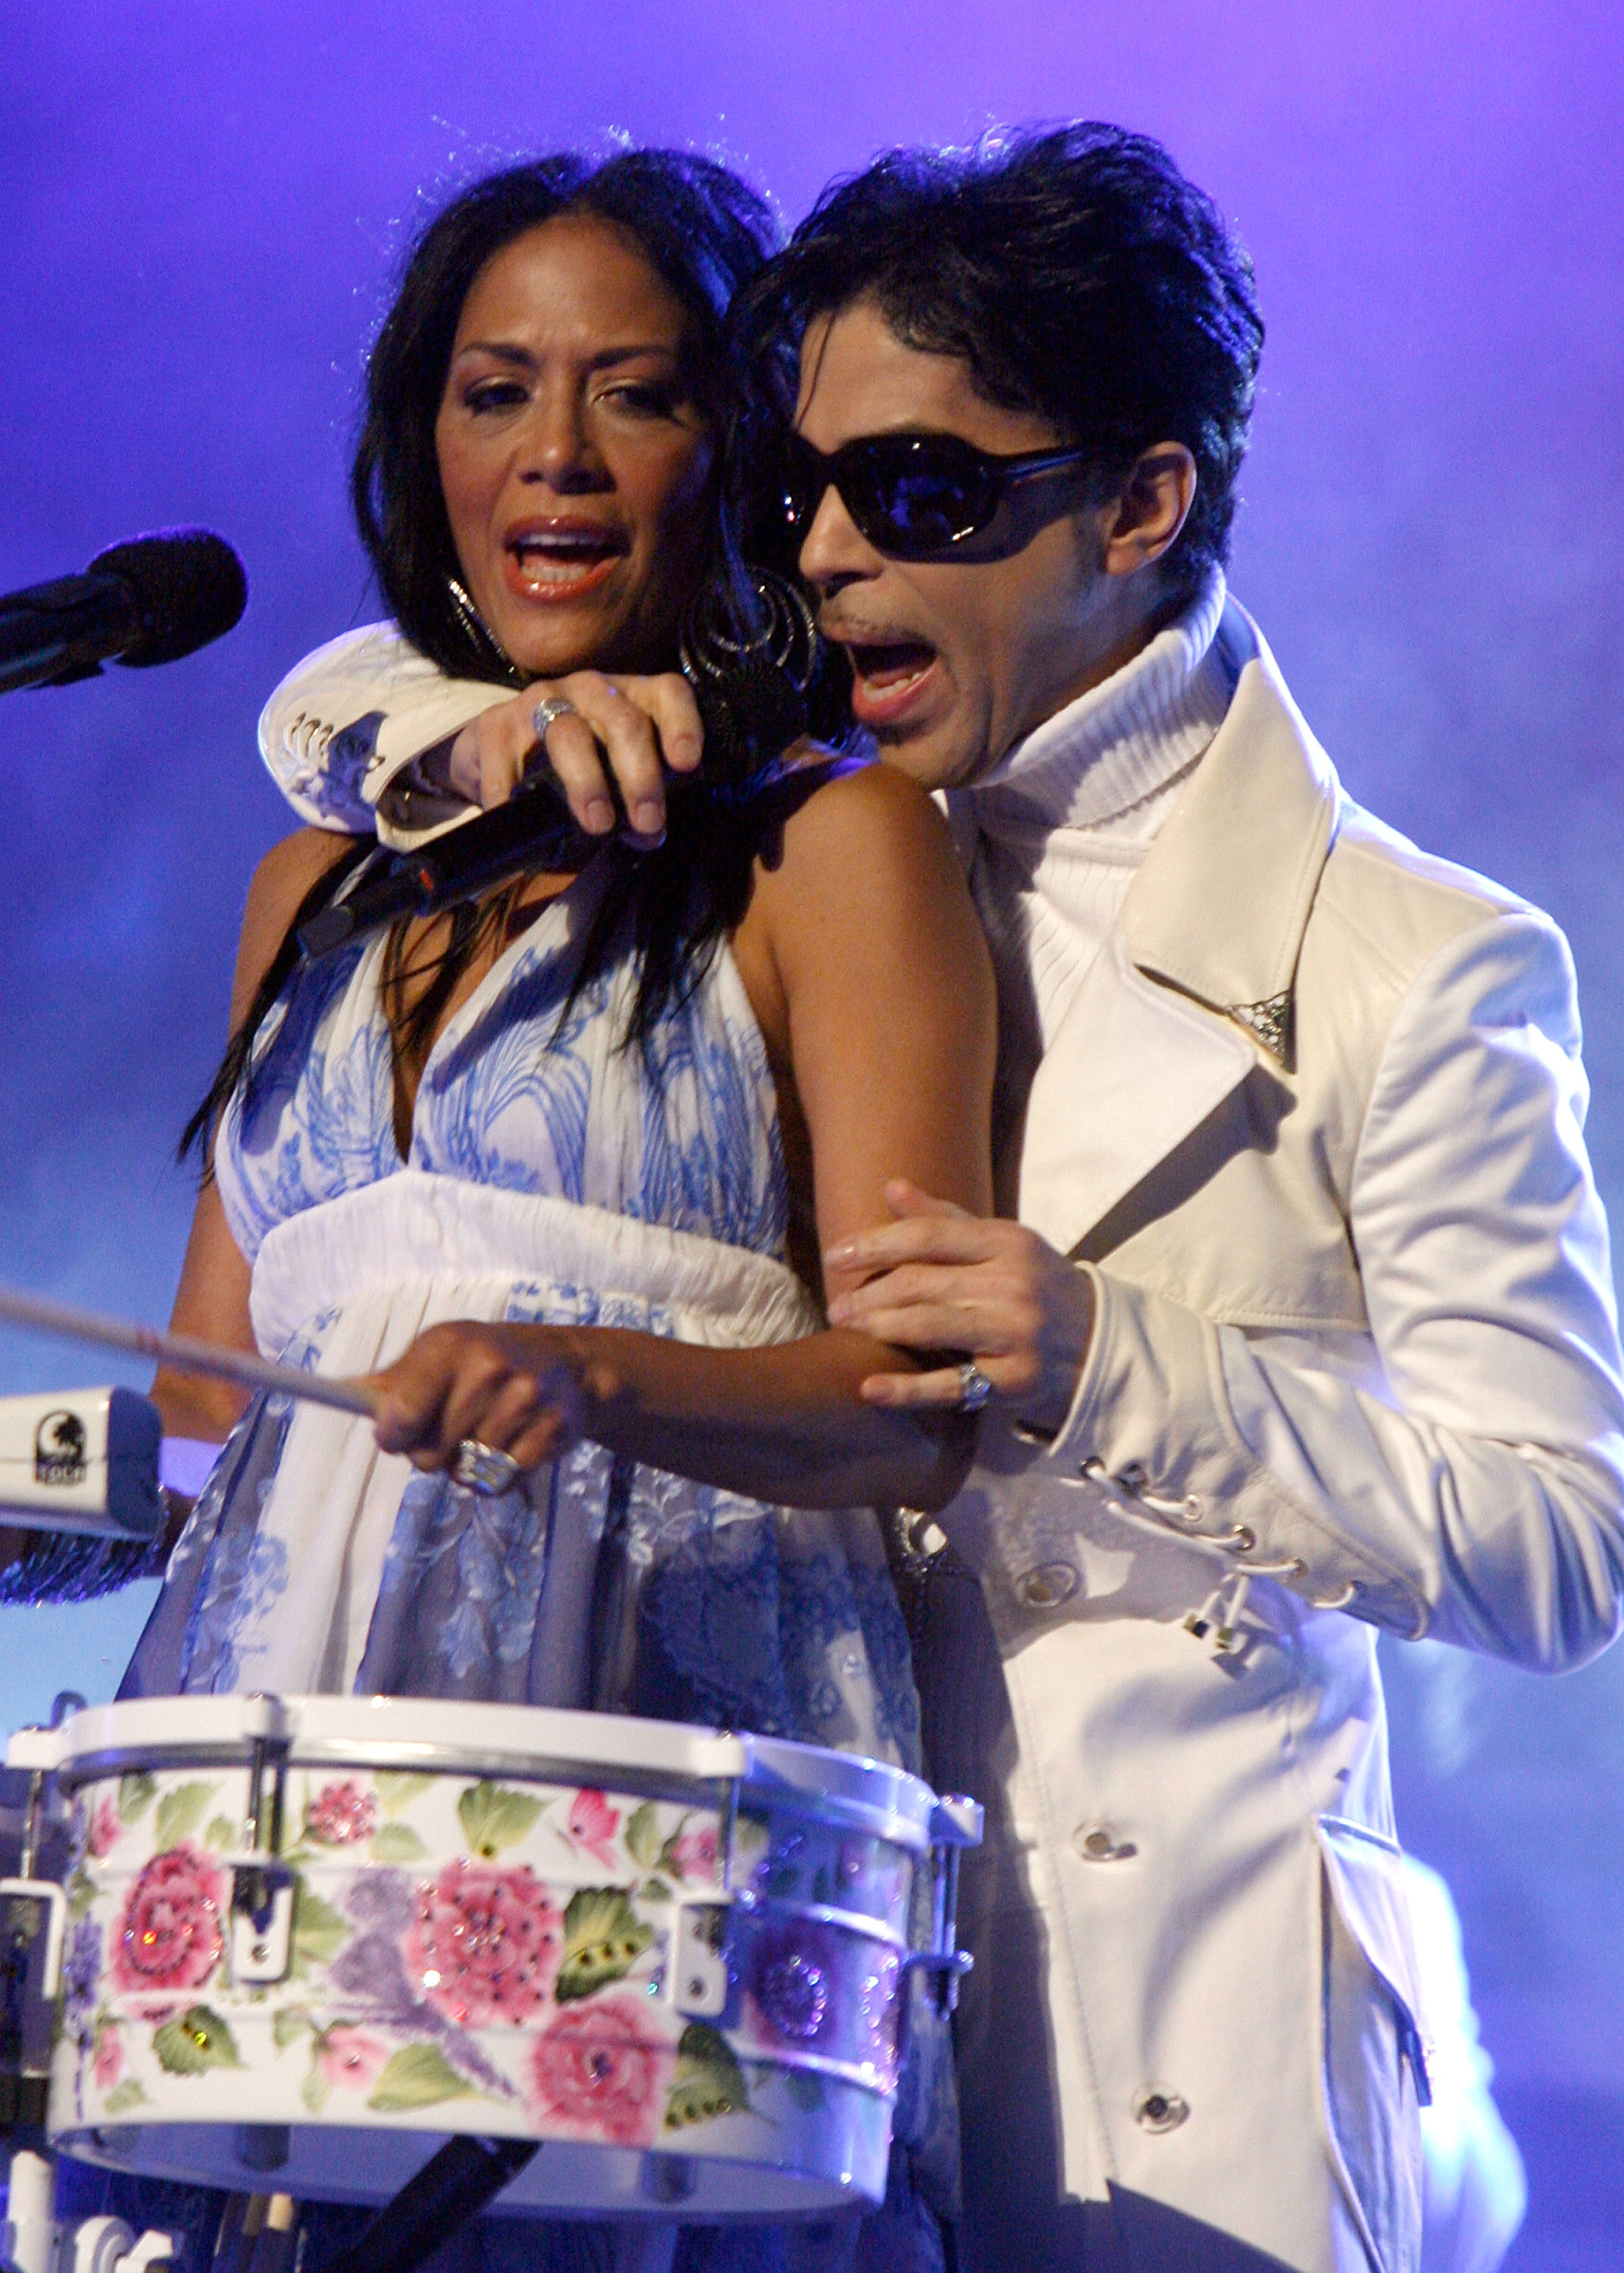 Sheila E and Prince perform on June 1, 2007 in Pasadena, Calif.